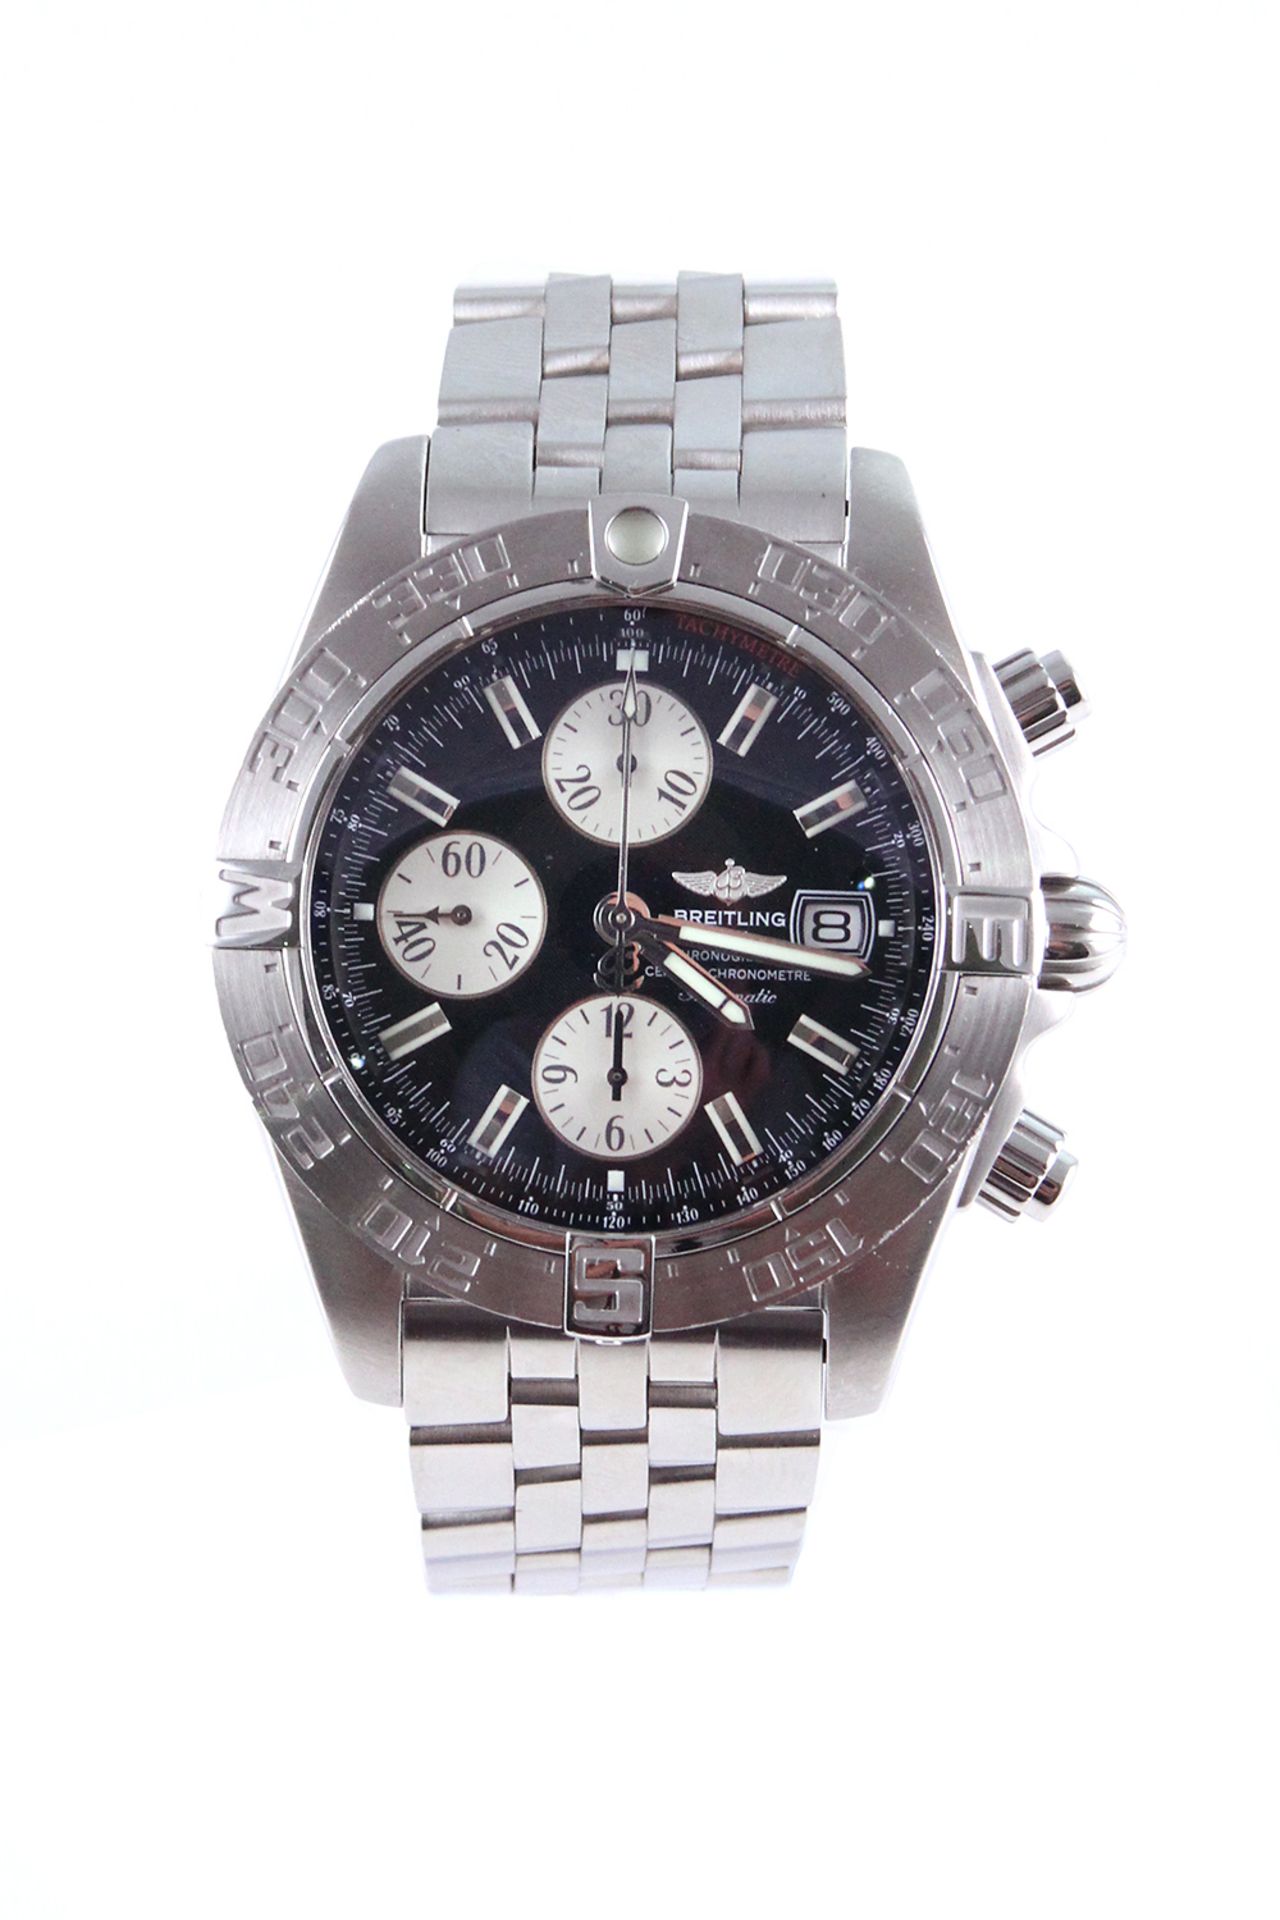 BREITLING Galactic II Chronograph Automatic A13364 - 2012 - Box & Papers - 12 Month Warranty